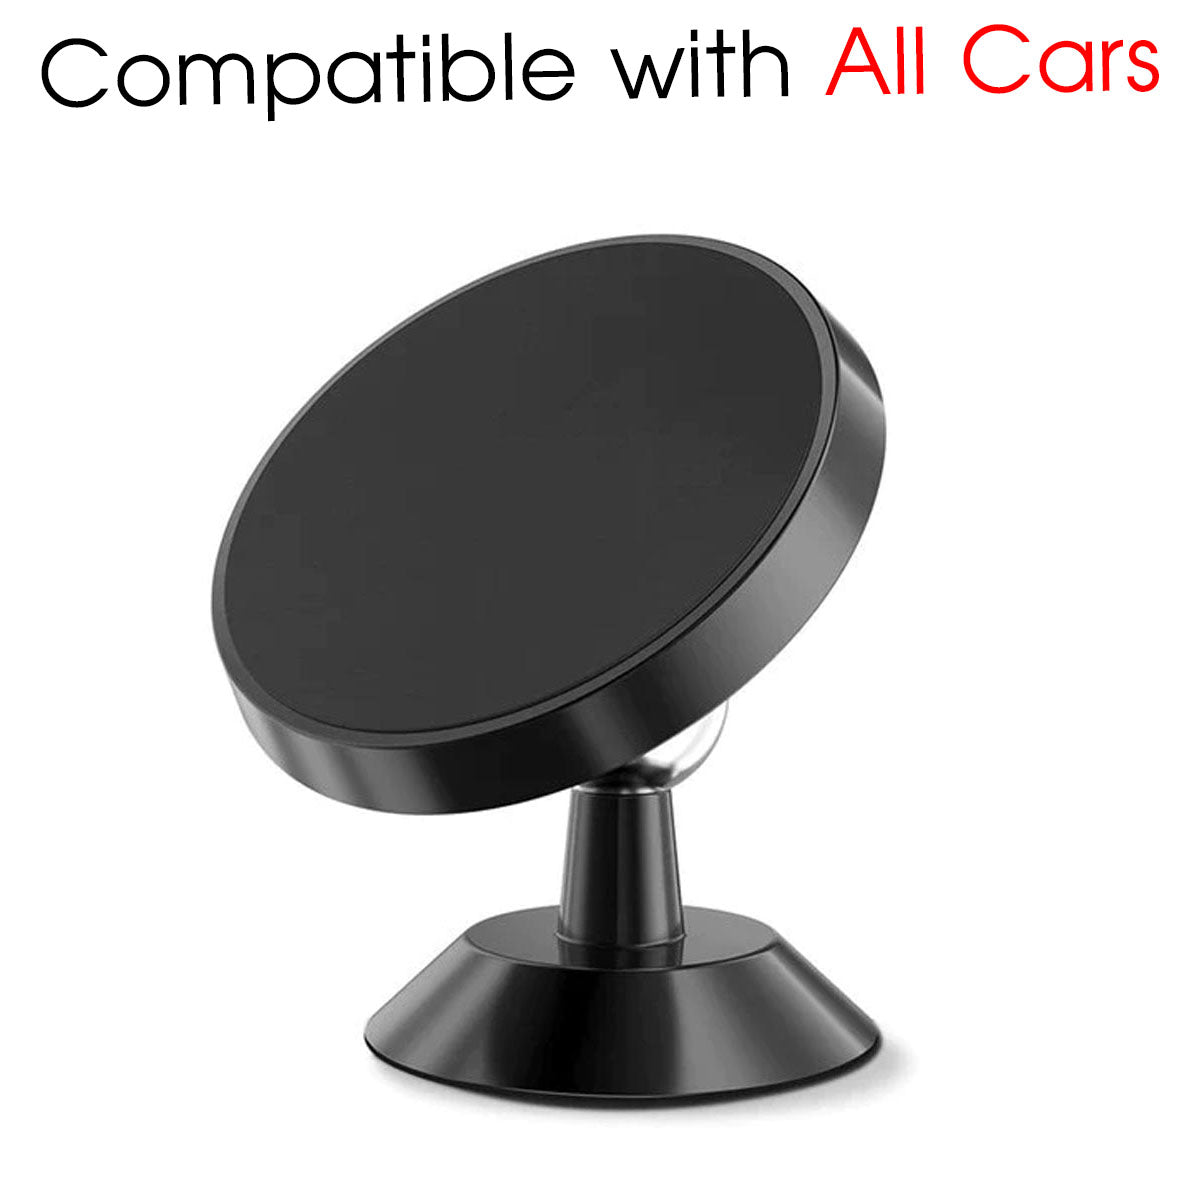 [2 Pack ] Magnetic Phone Mount, Custom For Your Cars, [ Super Strong Magnet ] [ with 4 Metal Plate ] car Magnetic Phone Holder, [ 360° Rotation ] Universal Dashboard car Mount Fits All Cell Phones, Car Accessories CA13982